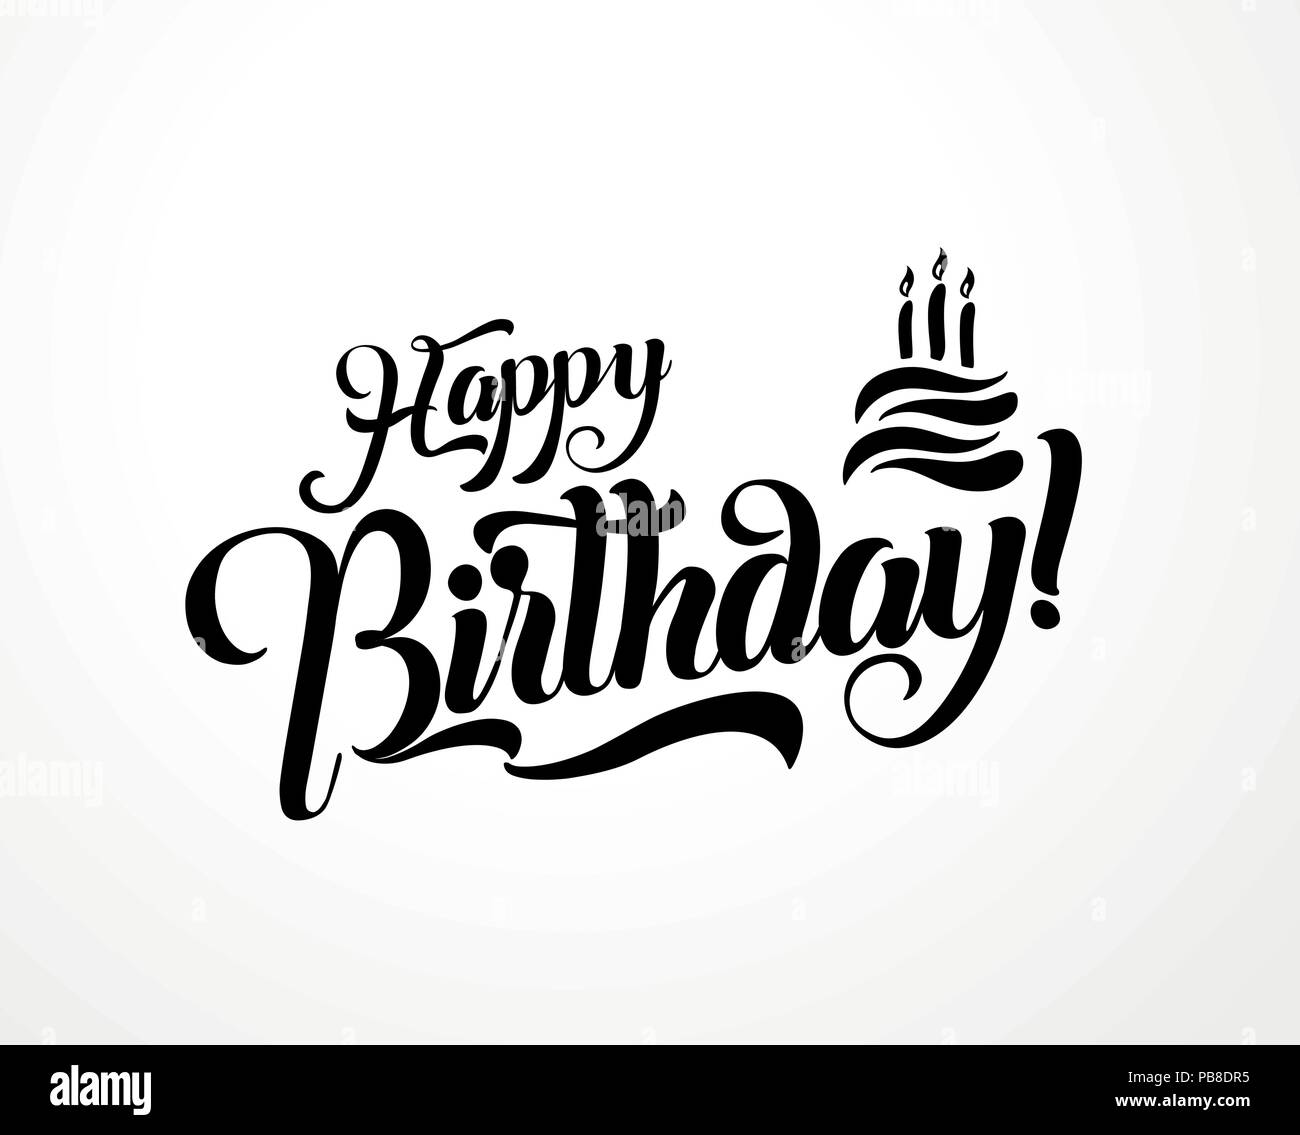 Download Happy birthday lettering text vector illustration. Birthday greeting card design Stock Vector ...